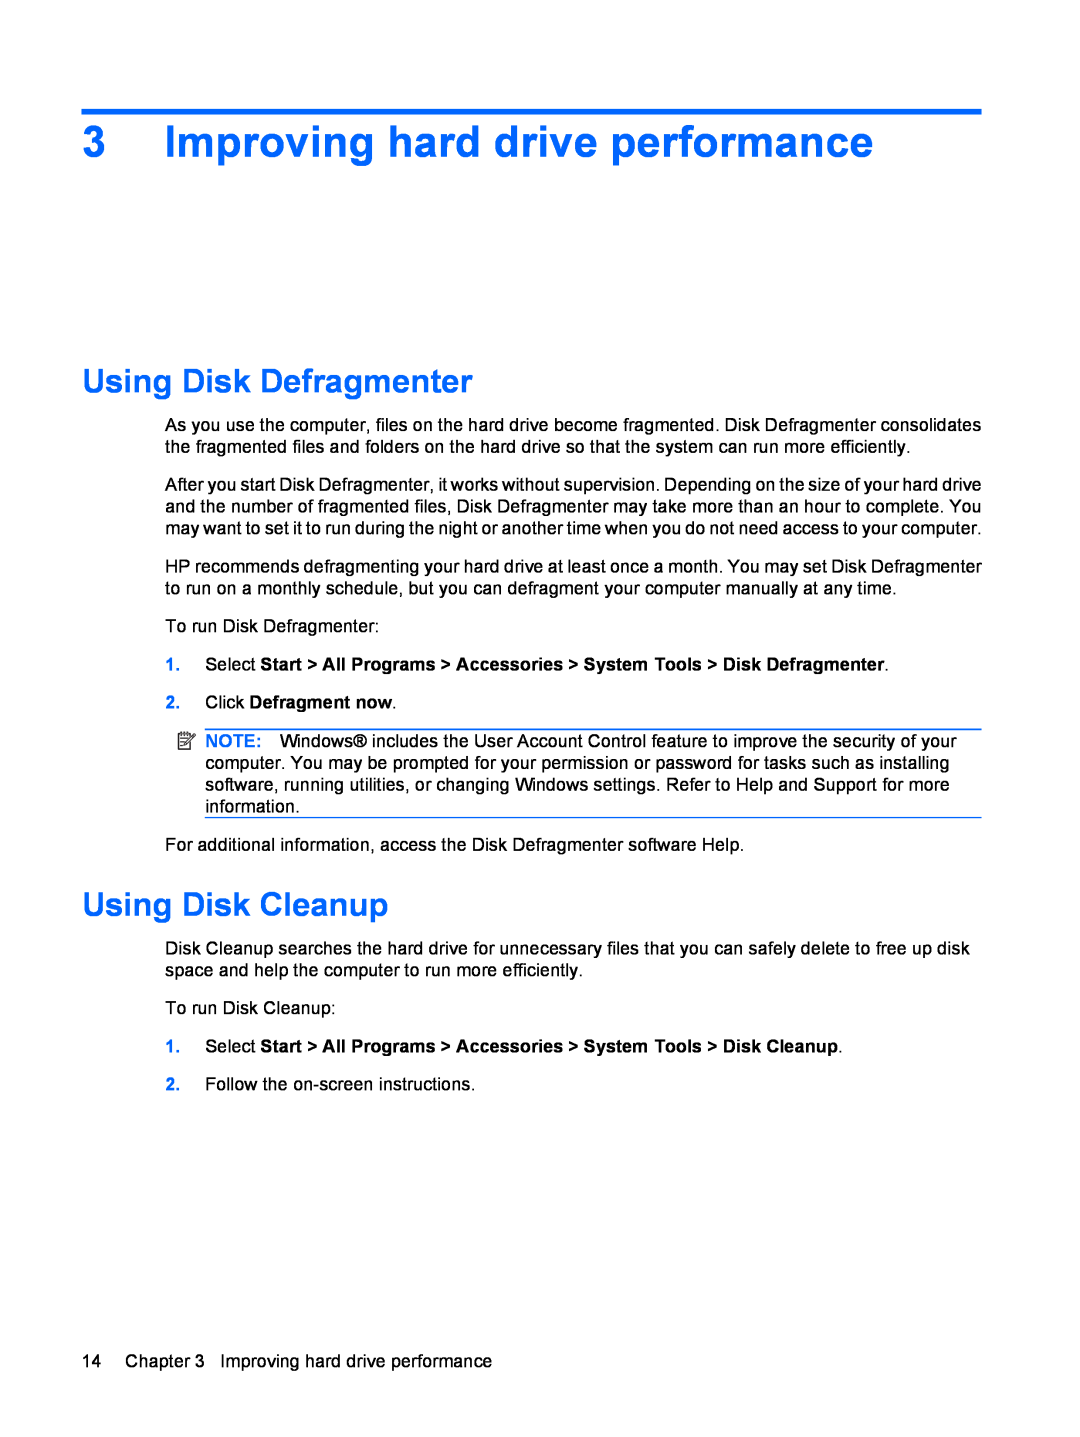 HP tx2-1326au, t22au Improving hard drive performance, Using Disk Defragmenter, Using Disk Cleanup, Click Defragment now 